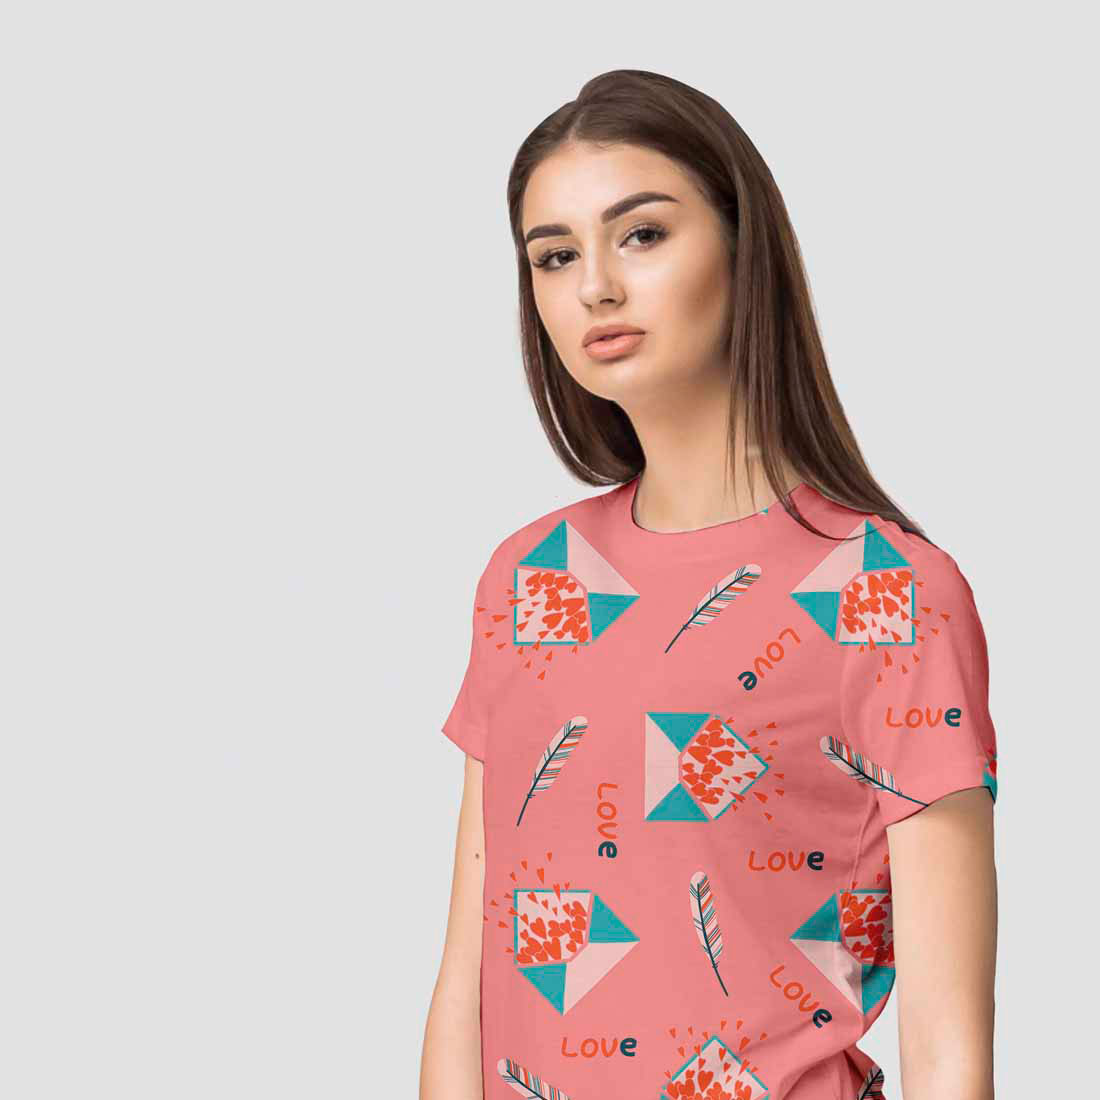 Image of a T-shirt with a charming pattern on the theme of Valentine's Day.